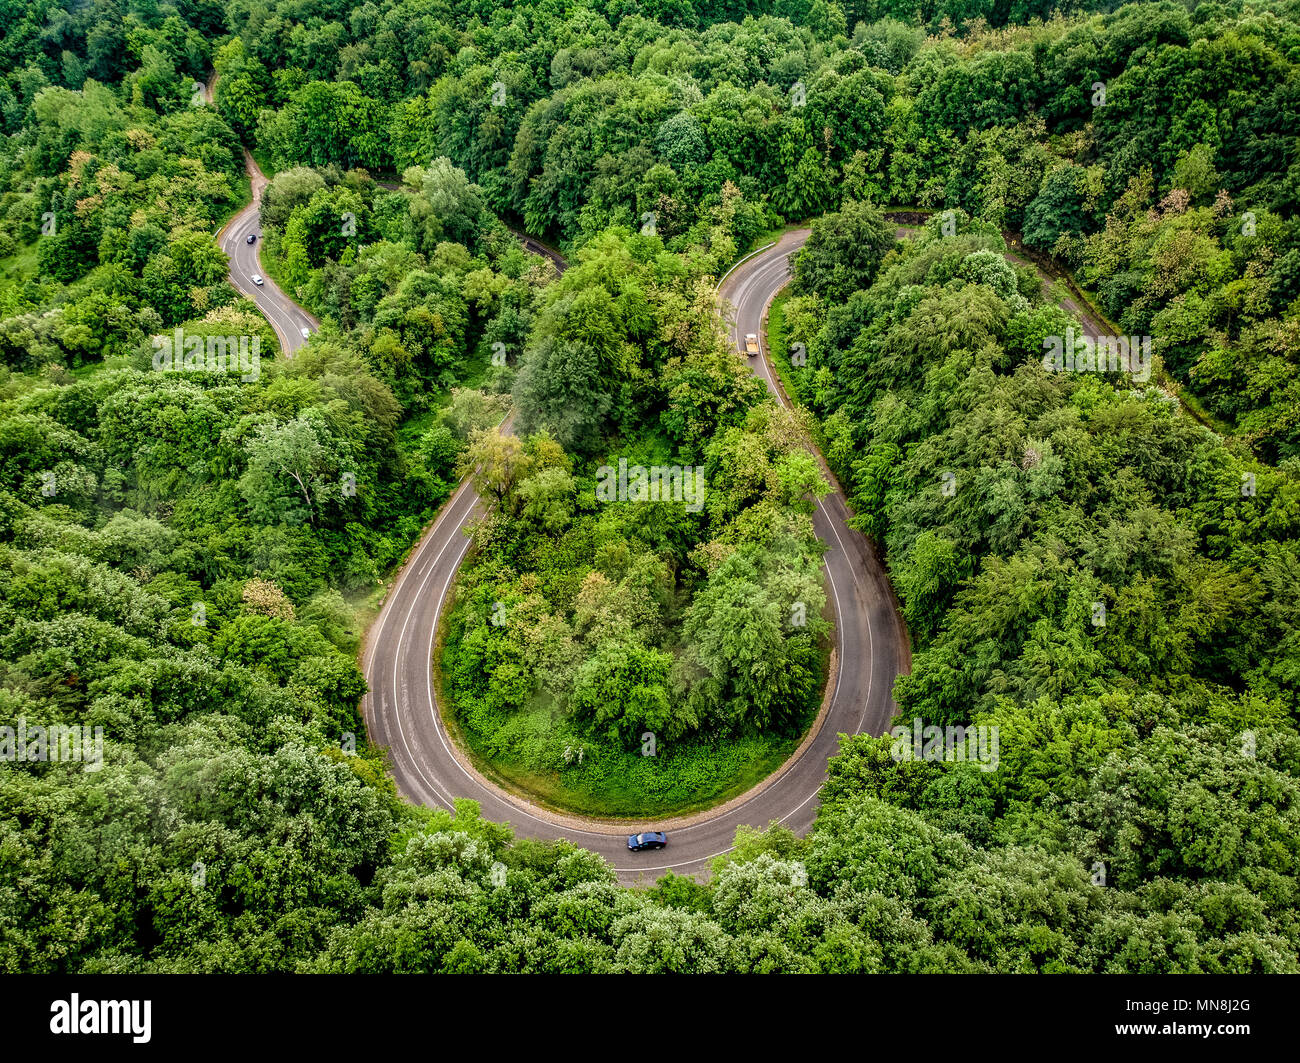 Car passing on an extreme winding road in the forest, aerial view Stock Photo